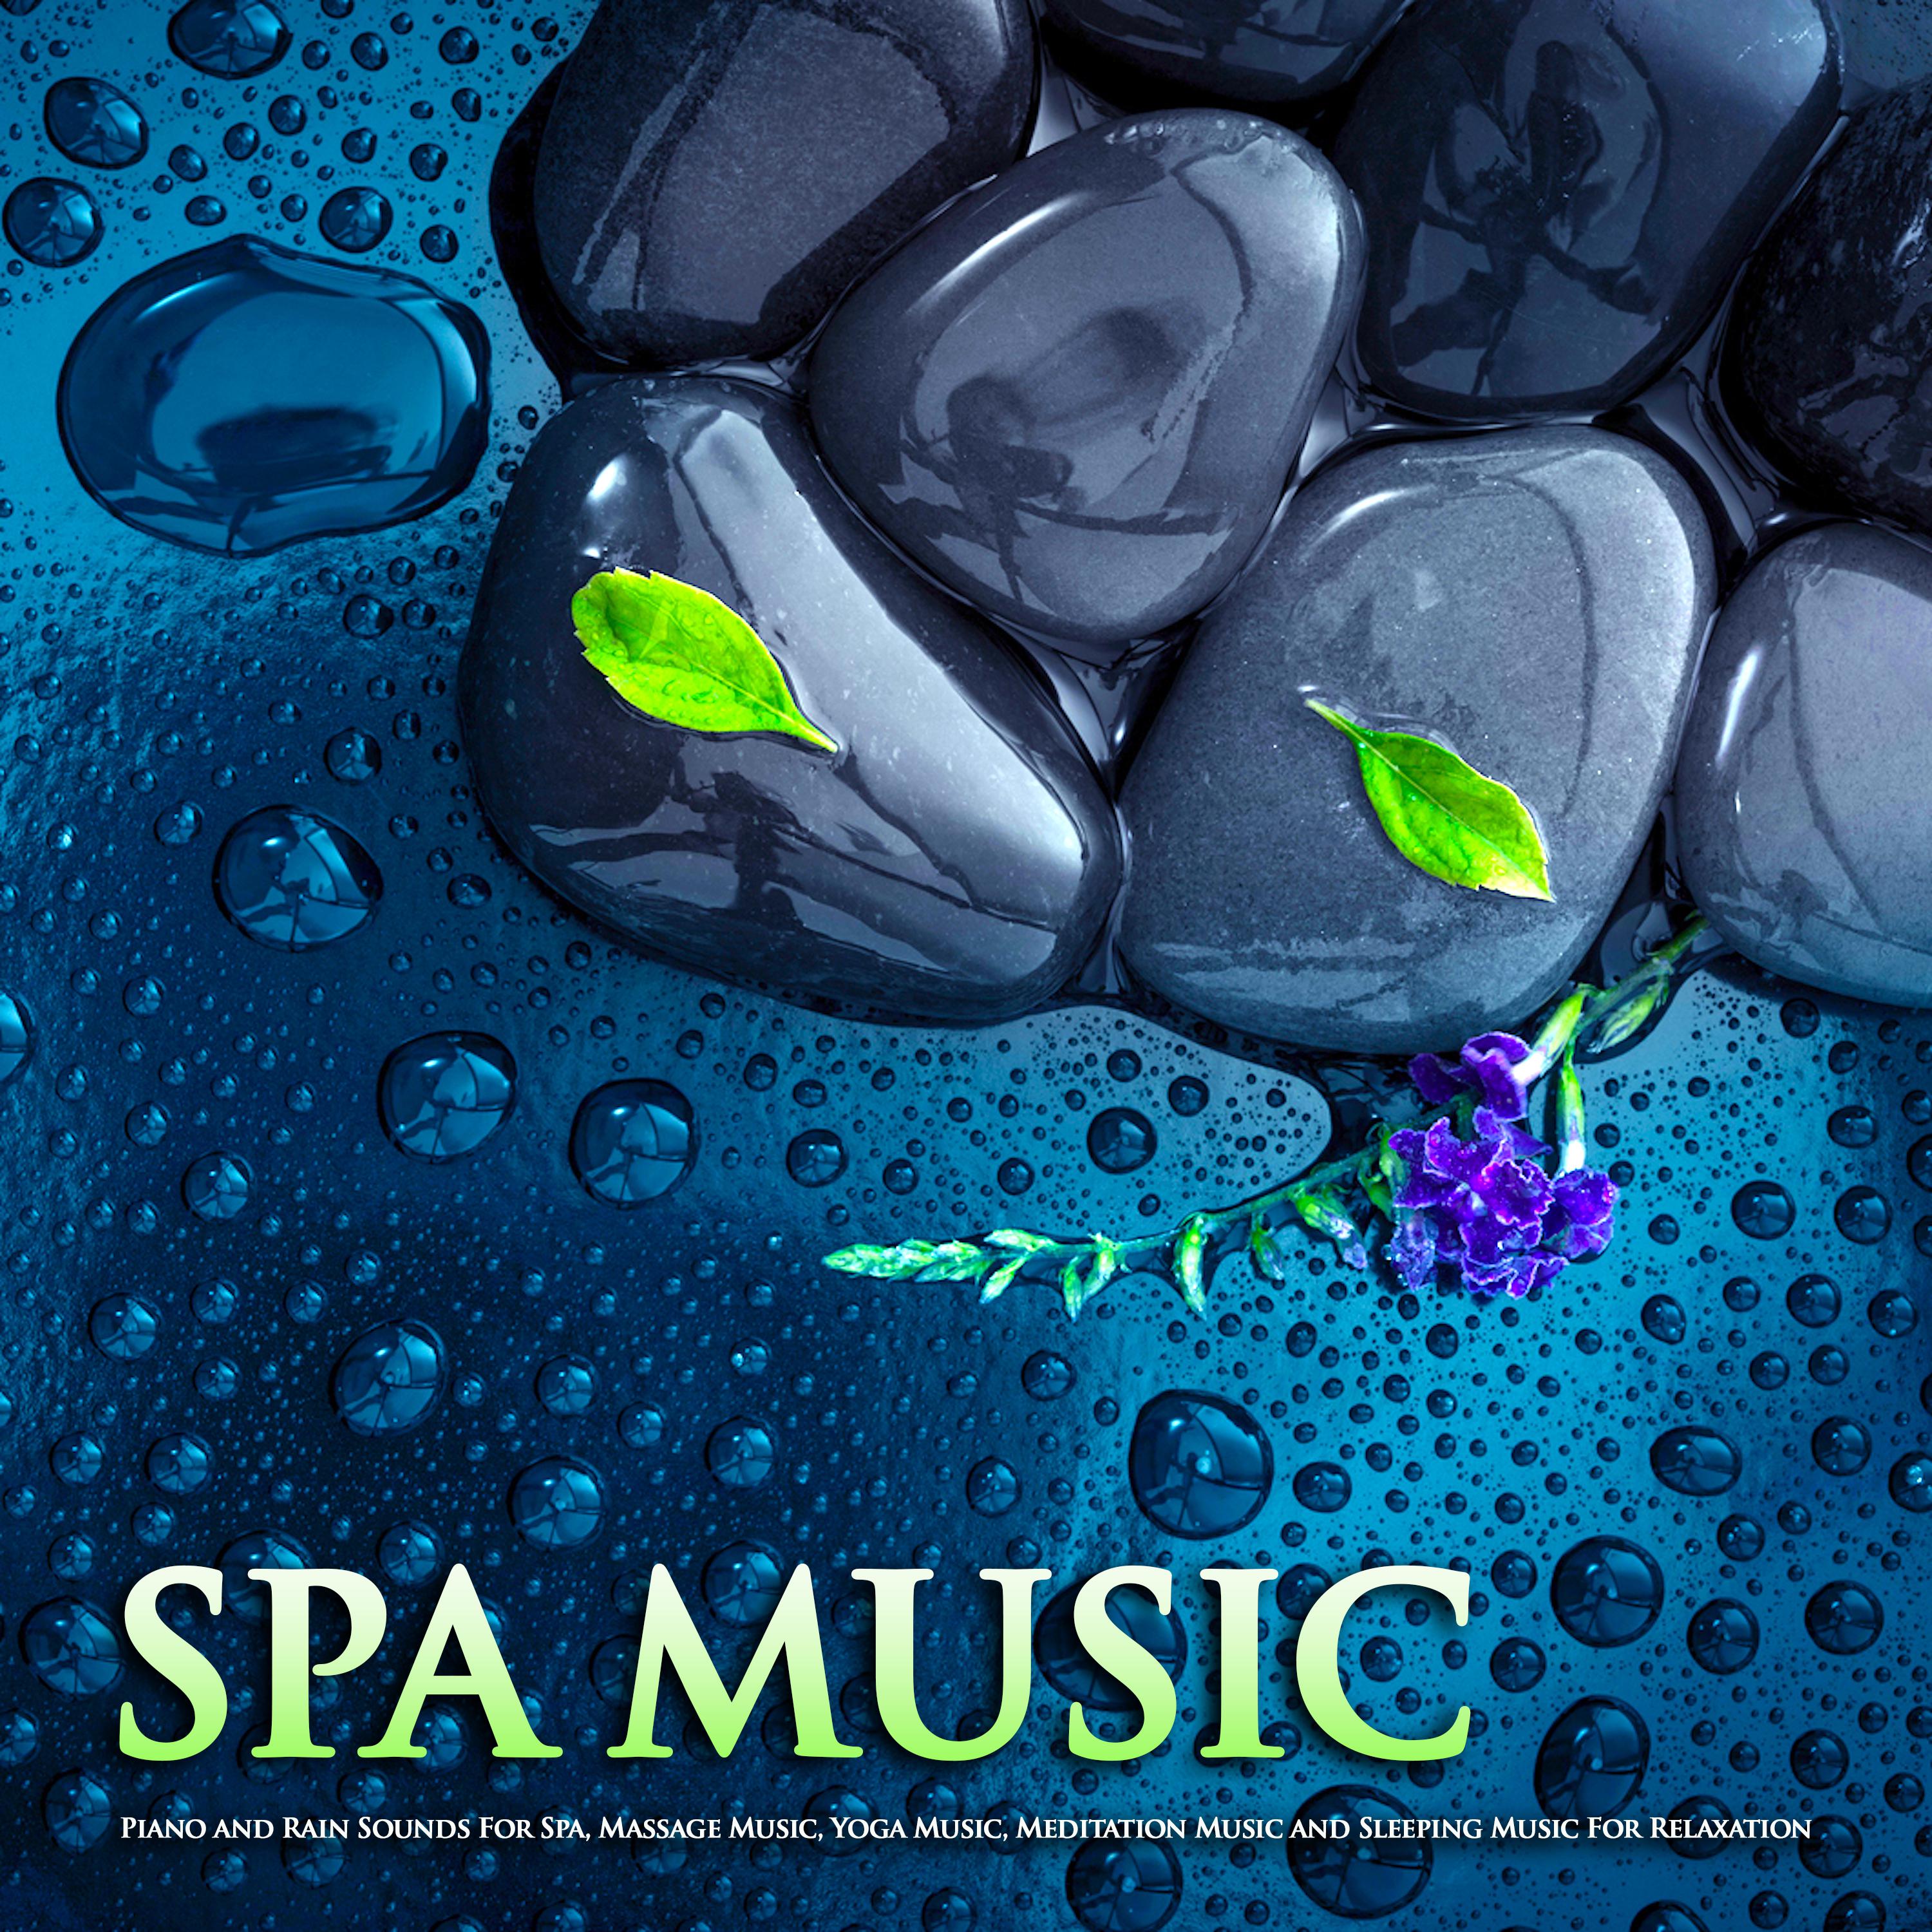 Spa Music and The Sounds of Rain